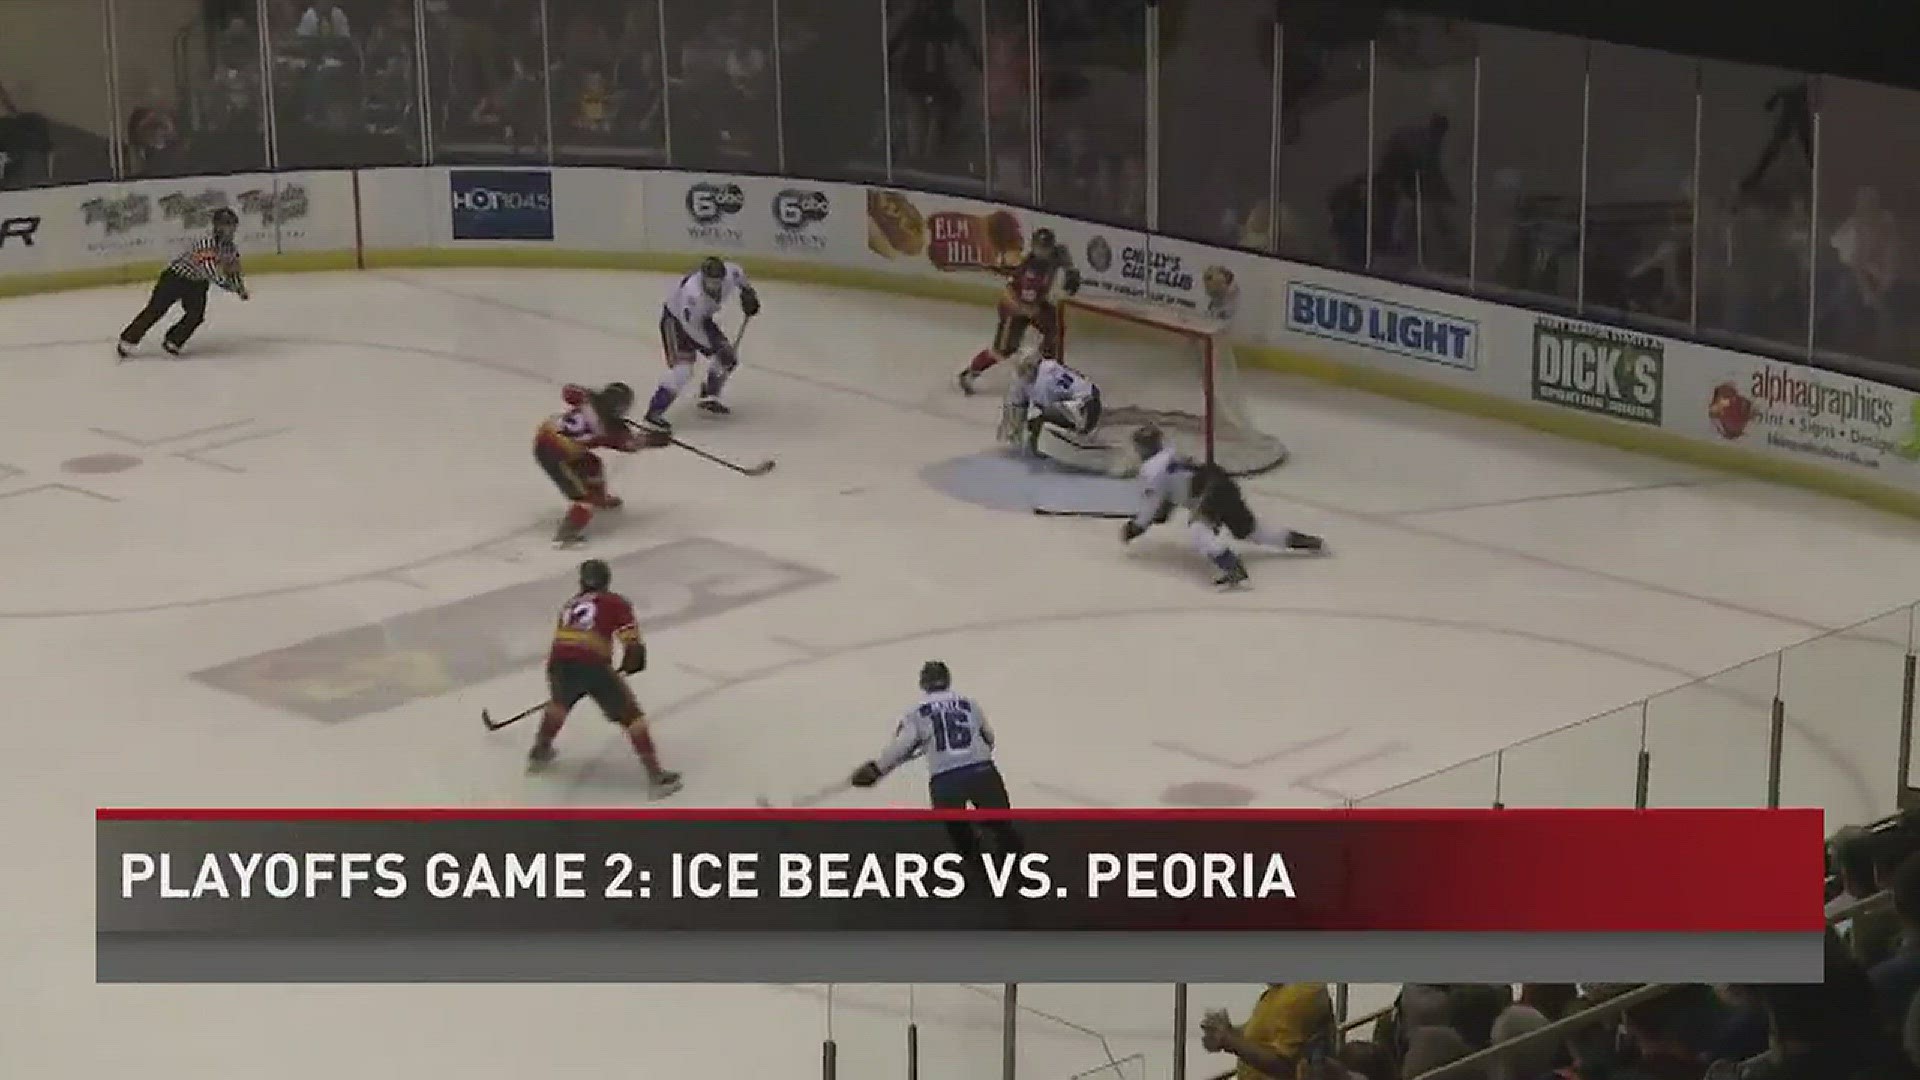 Peoria sweeps the Ice Bears in their first round playoff series, eliminating Knoxville with a 5-1 defeat at the Coliseum on Friday night.